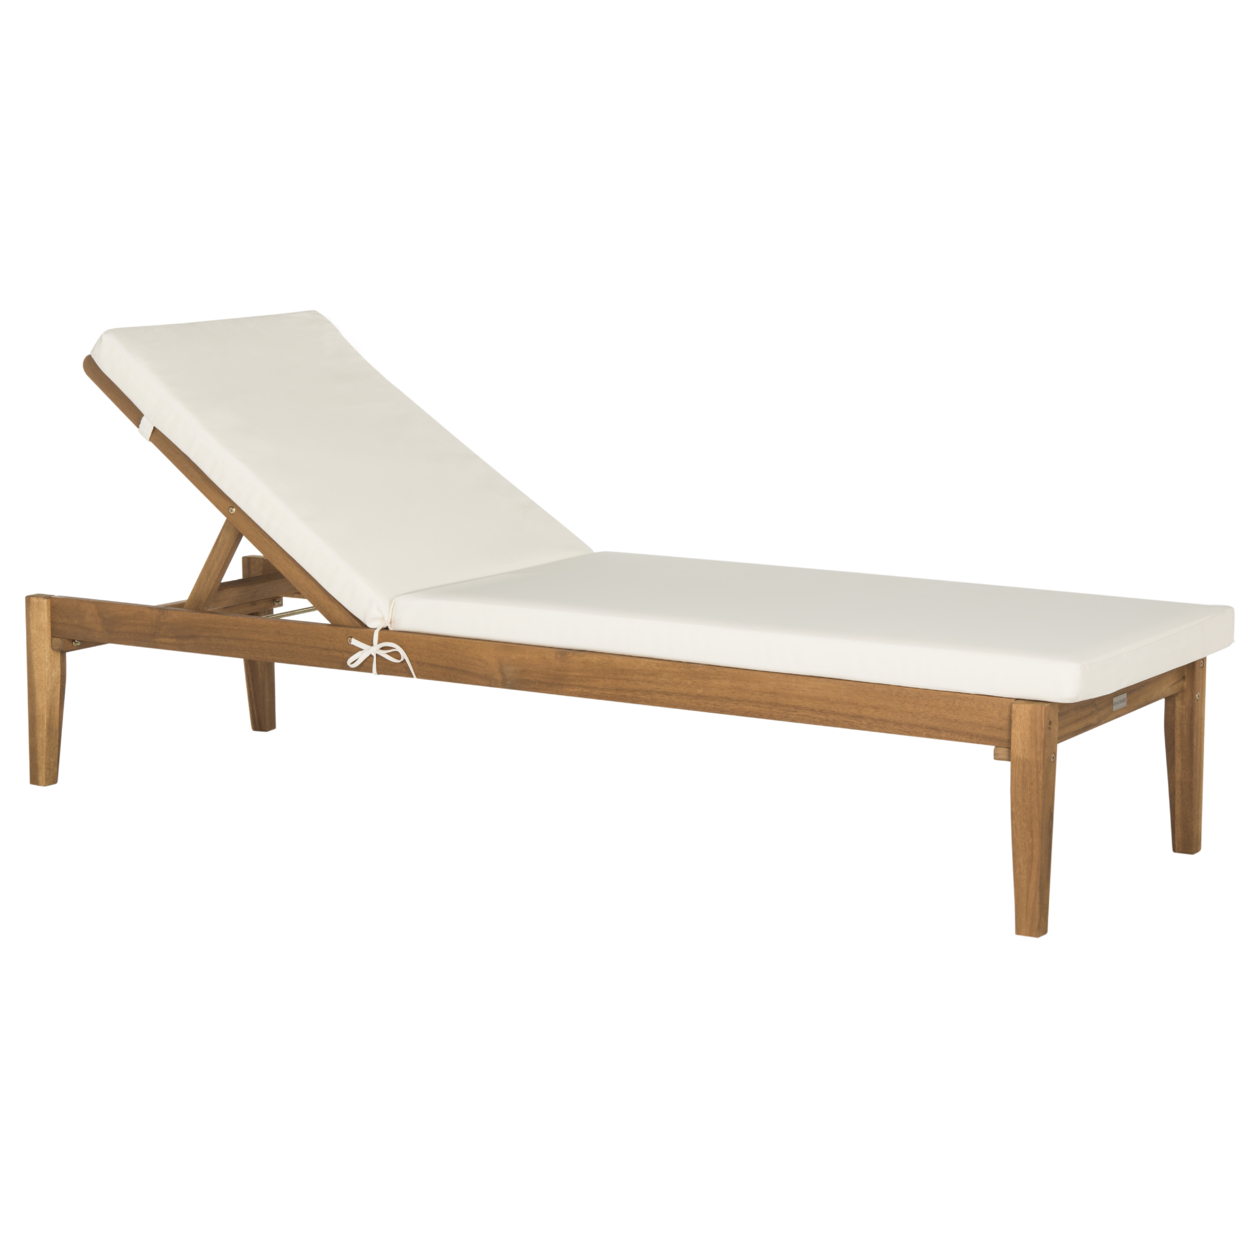 SAFAVIEH Outdoor Collection Arcata Chaise Sunlounger Natural/Beige